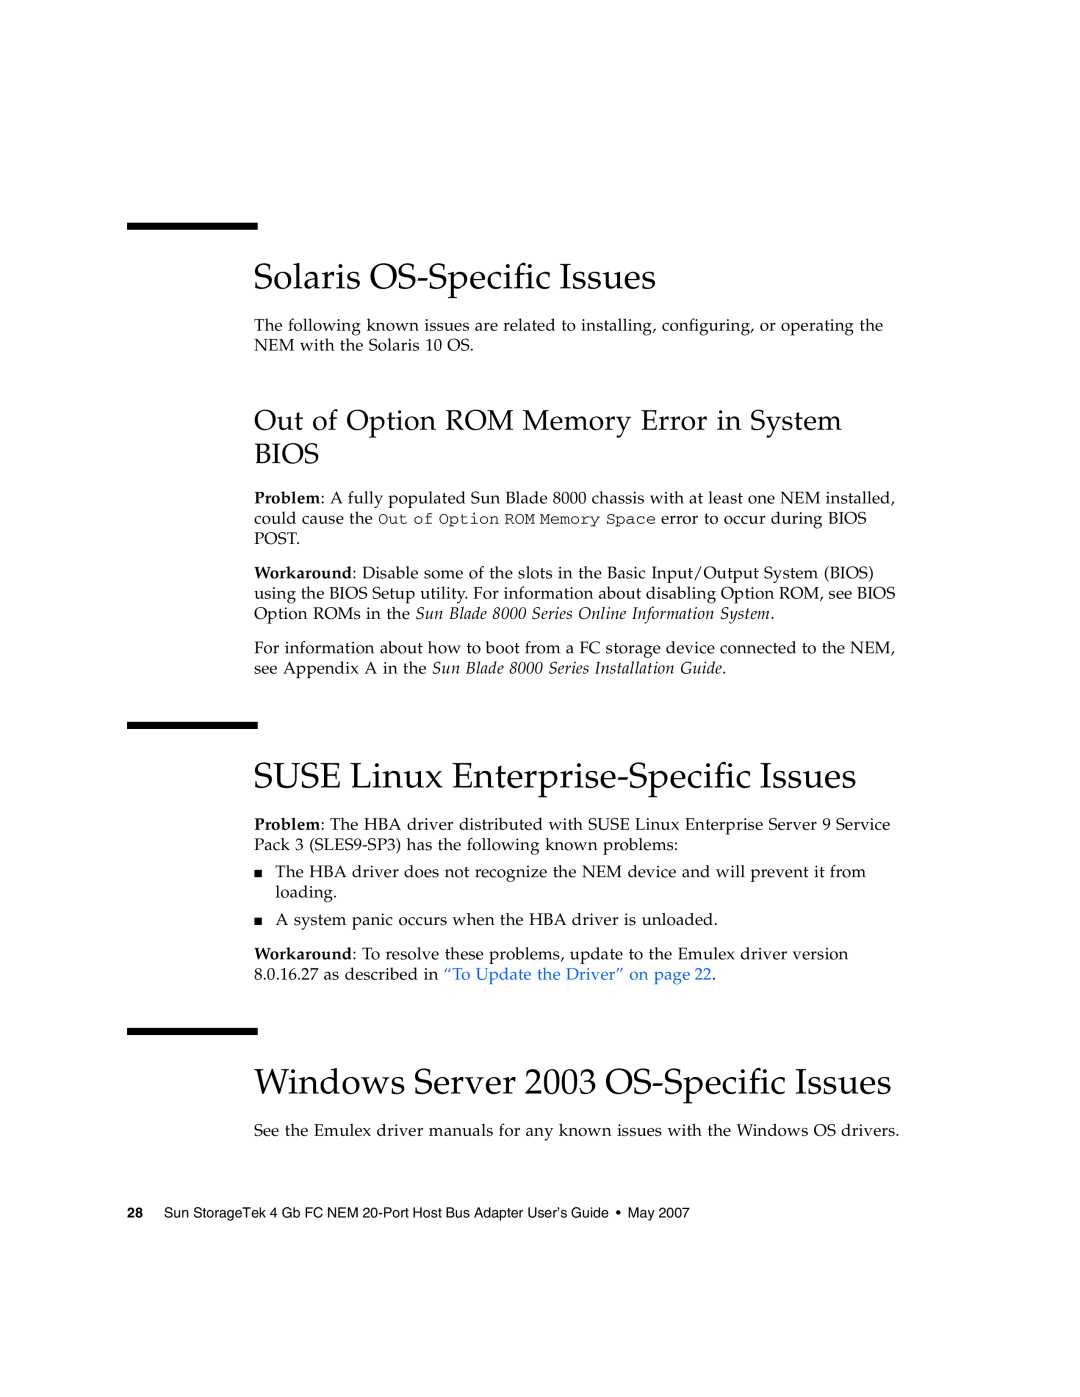 Sun Microsystems 2.0 manual Solaris OS-Specific Issues, SUSE Linux Enterprise-Specific Issues 